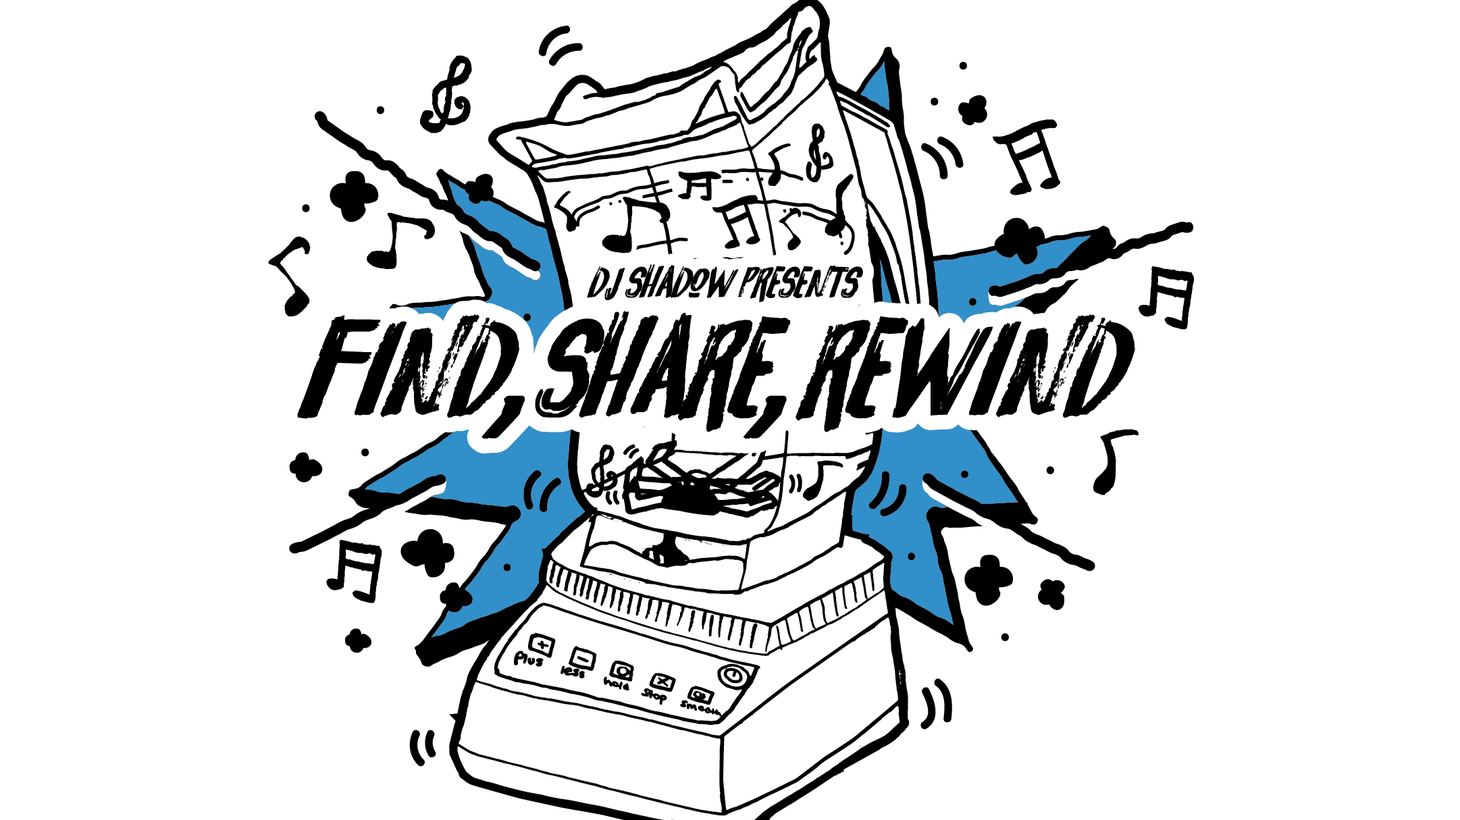 Bay Area ground breaker DJ Shadow brings his innovative style to an exclusive monthly music residency on KCRW. In Find, Share, Rewind; Shadow guides listeners through decades of genre-bending musical evolution.